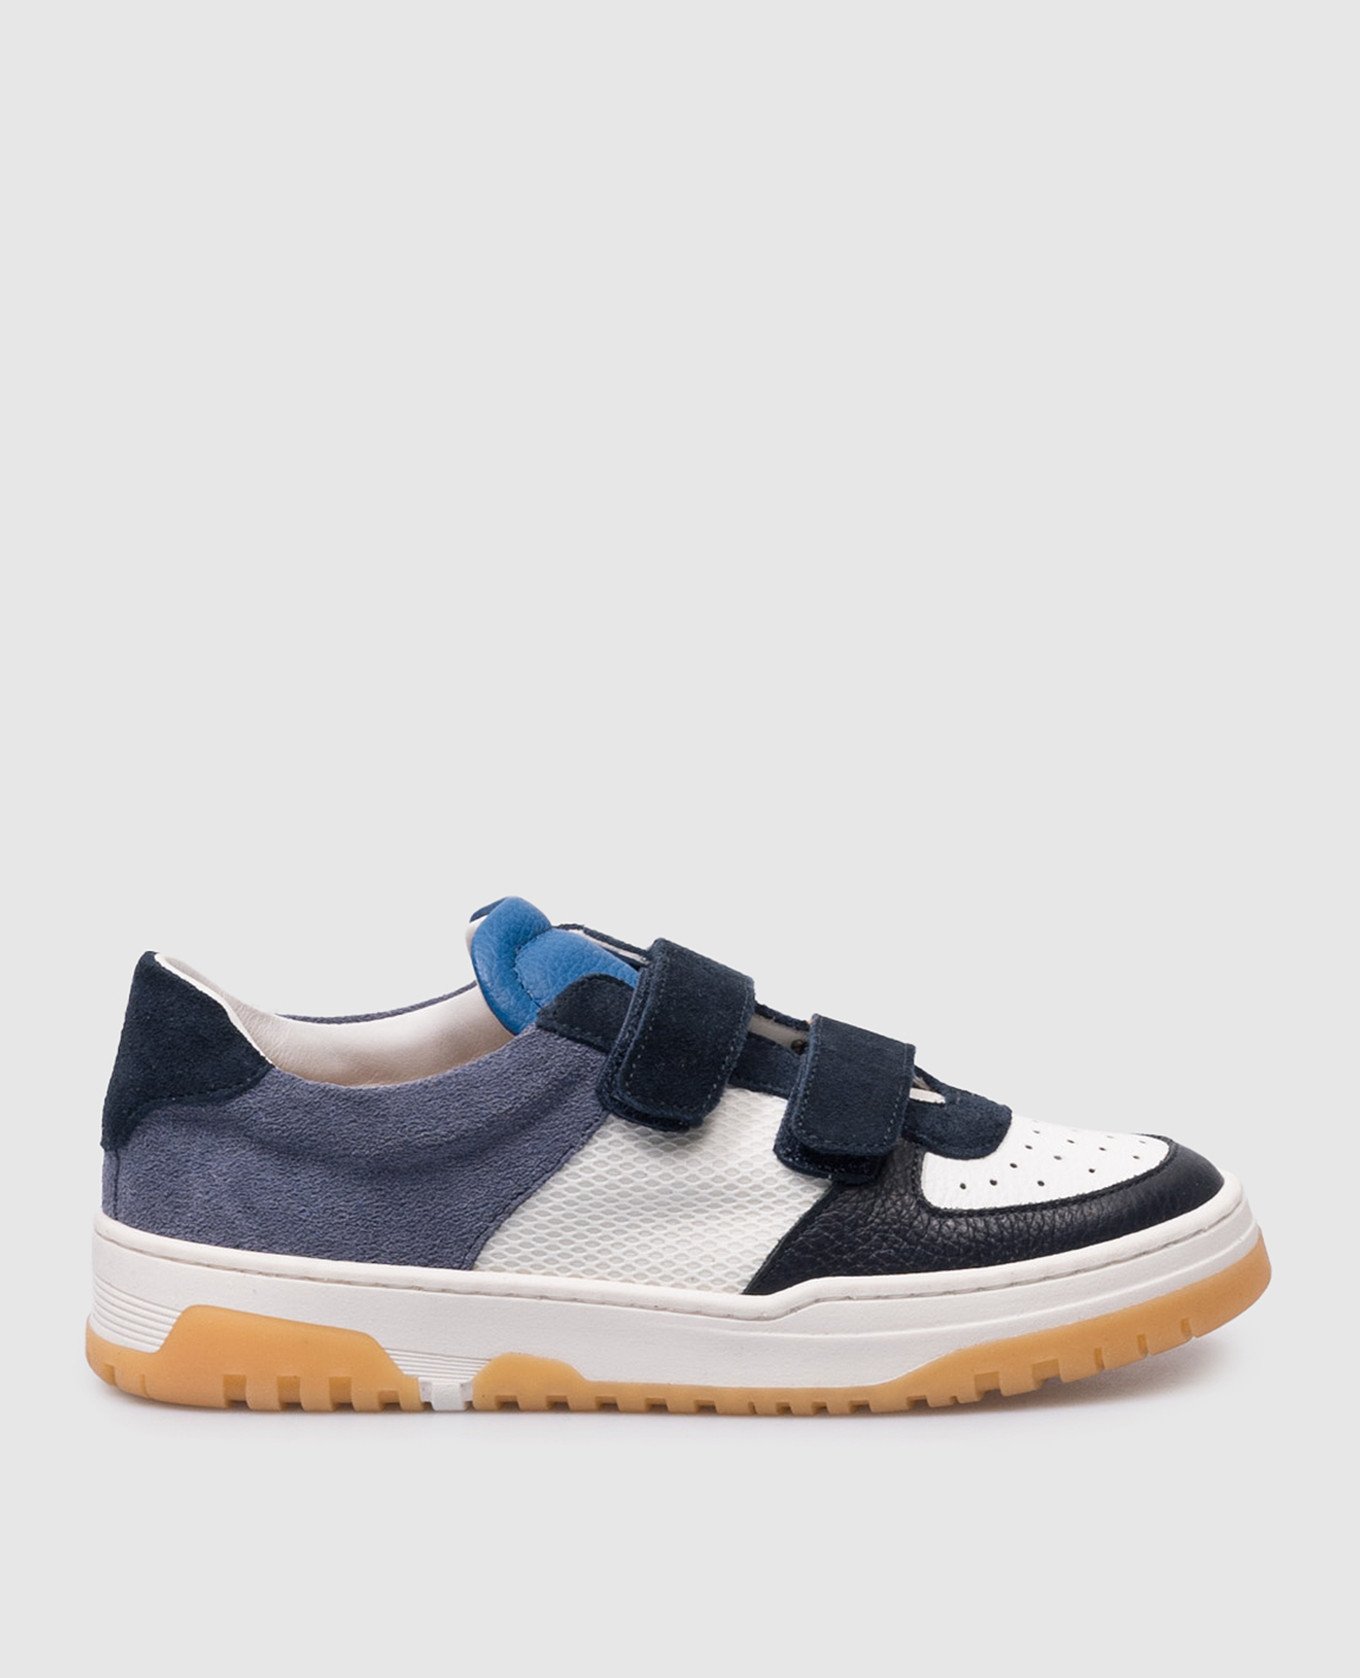 Children's blue leather sneakers